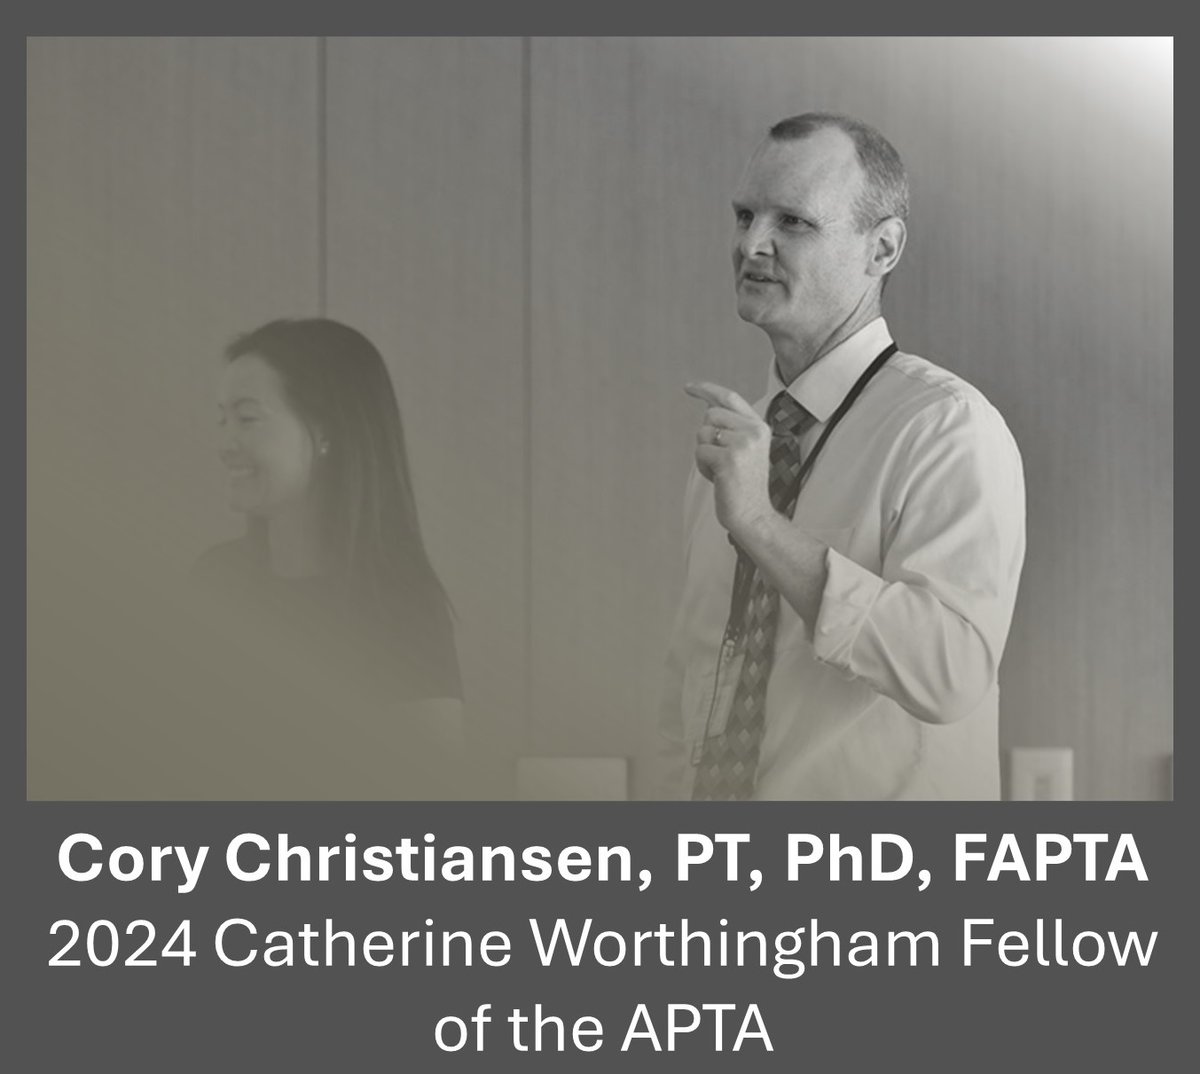 ✨Congratulations to @CUPhysTher faculty member, Cory Christiansen, PT, PhD, FAPTA, on his recognition as a 2024 Catherine Worthingham Fellow of the APTA! 

@CUMvmtScience | @Restore_Team | @VAECHCS | @VAResearch | @CURehabSci | @CUPhysMed | @CUAnschutz | @APTAtweets | @APTACO